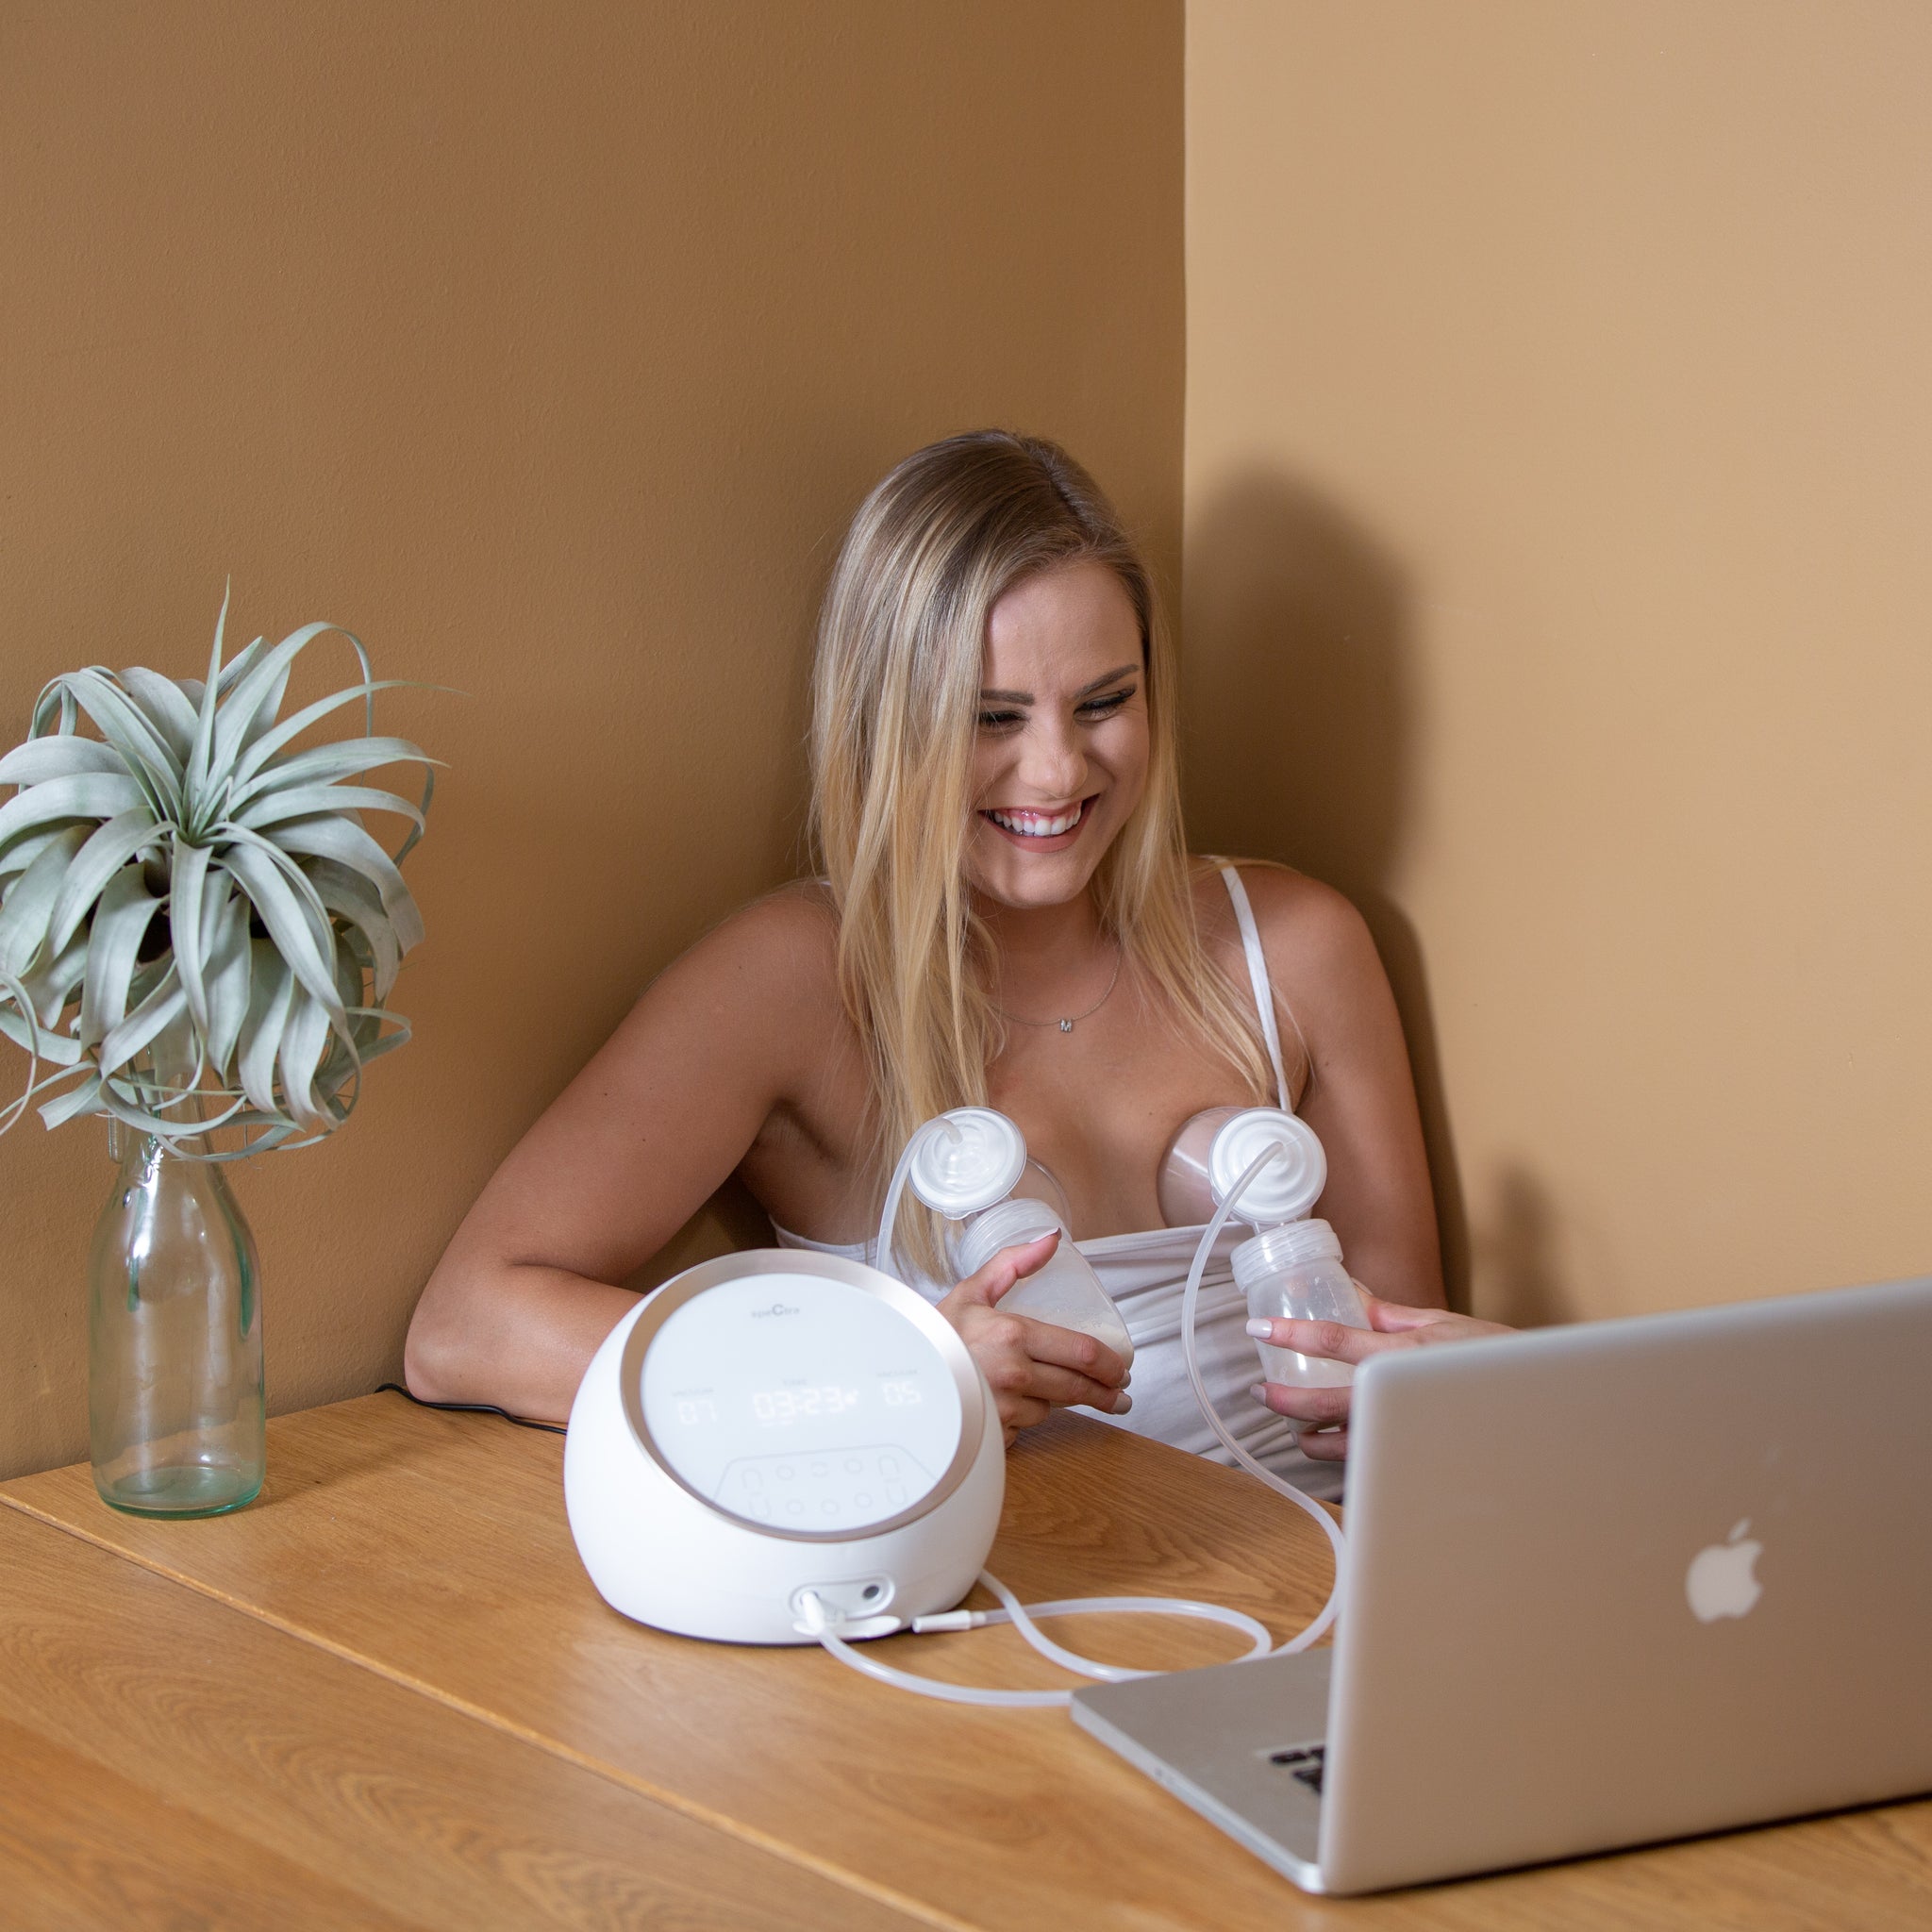 Spectra Synergy Gold Dual Powered Electric Breast Pump